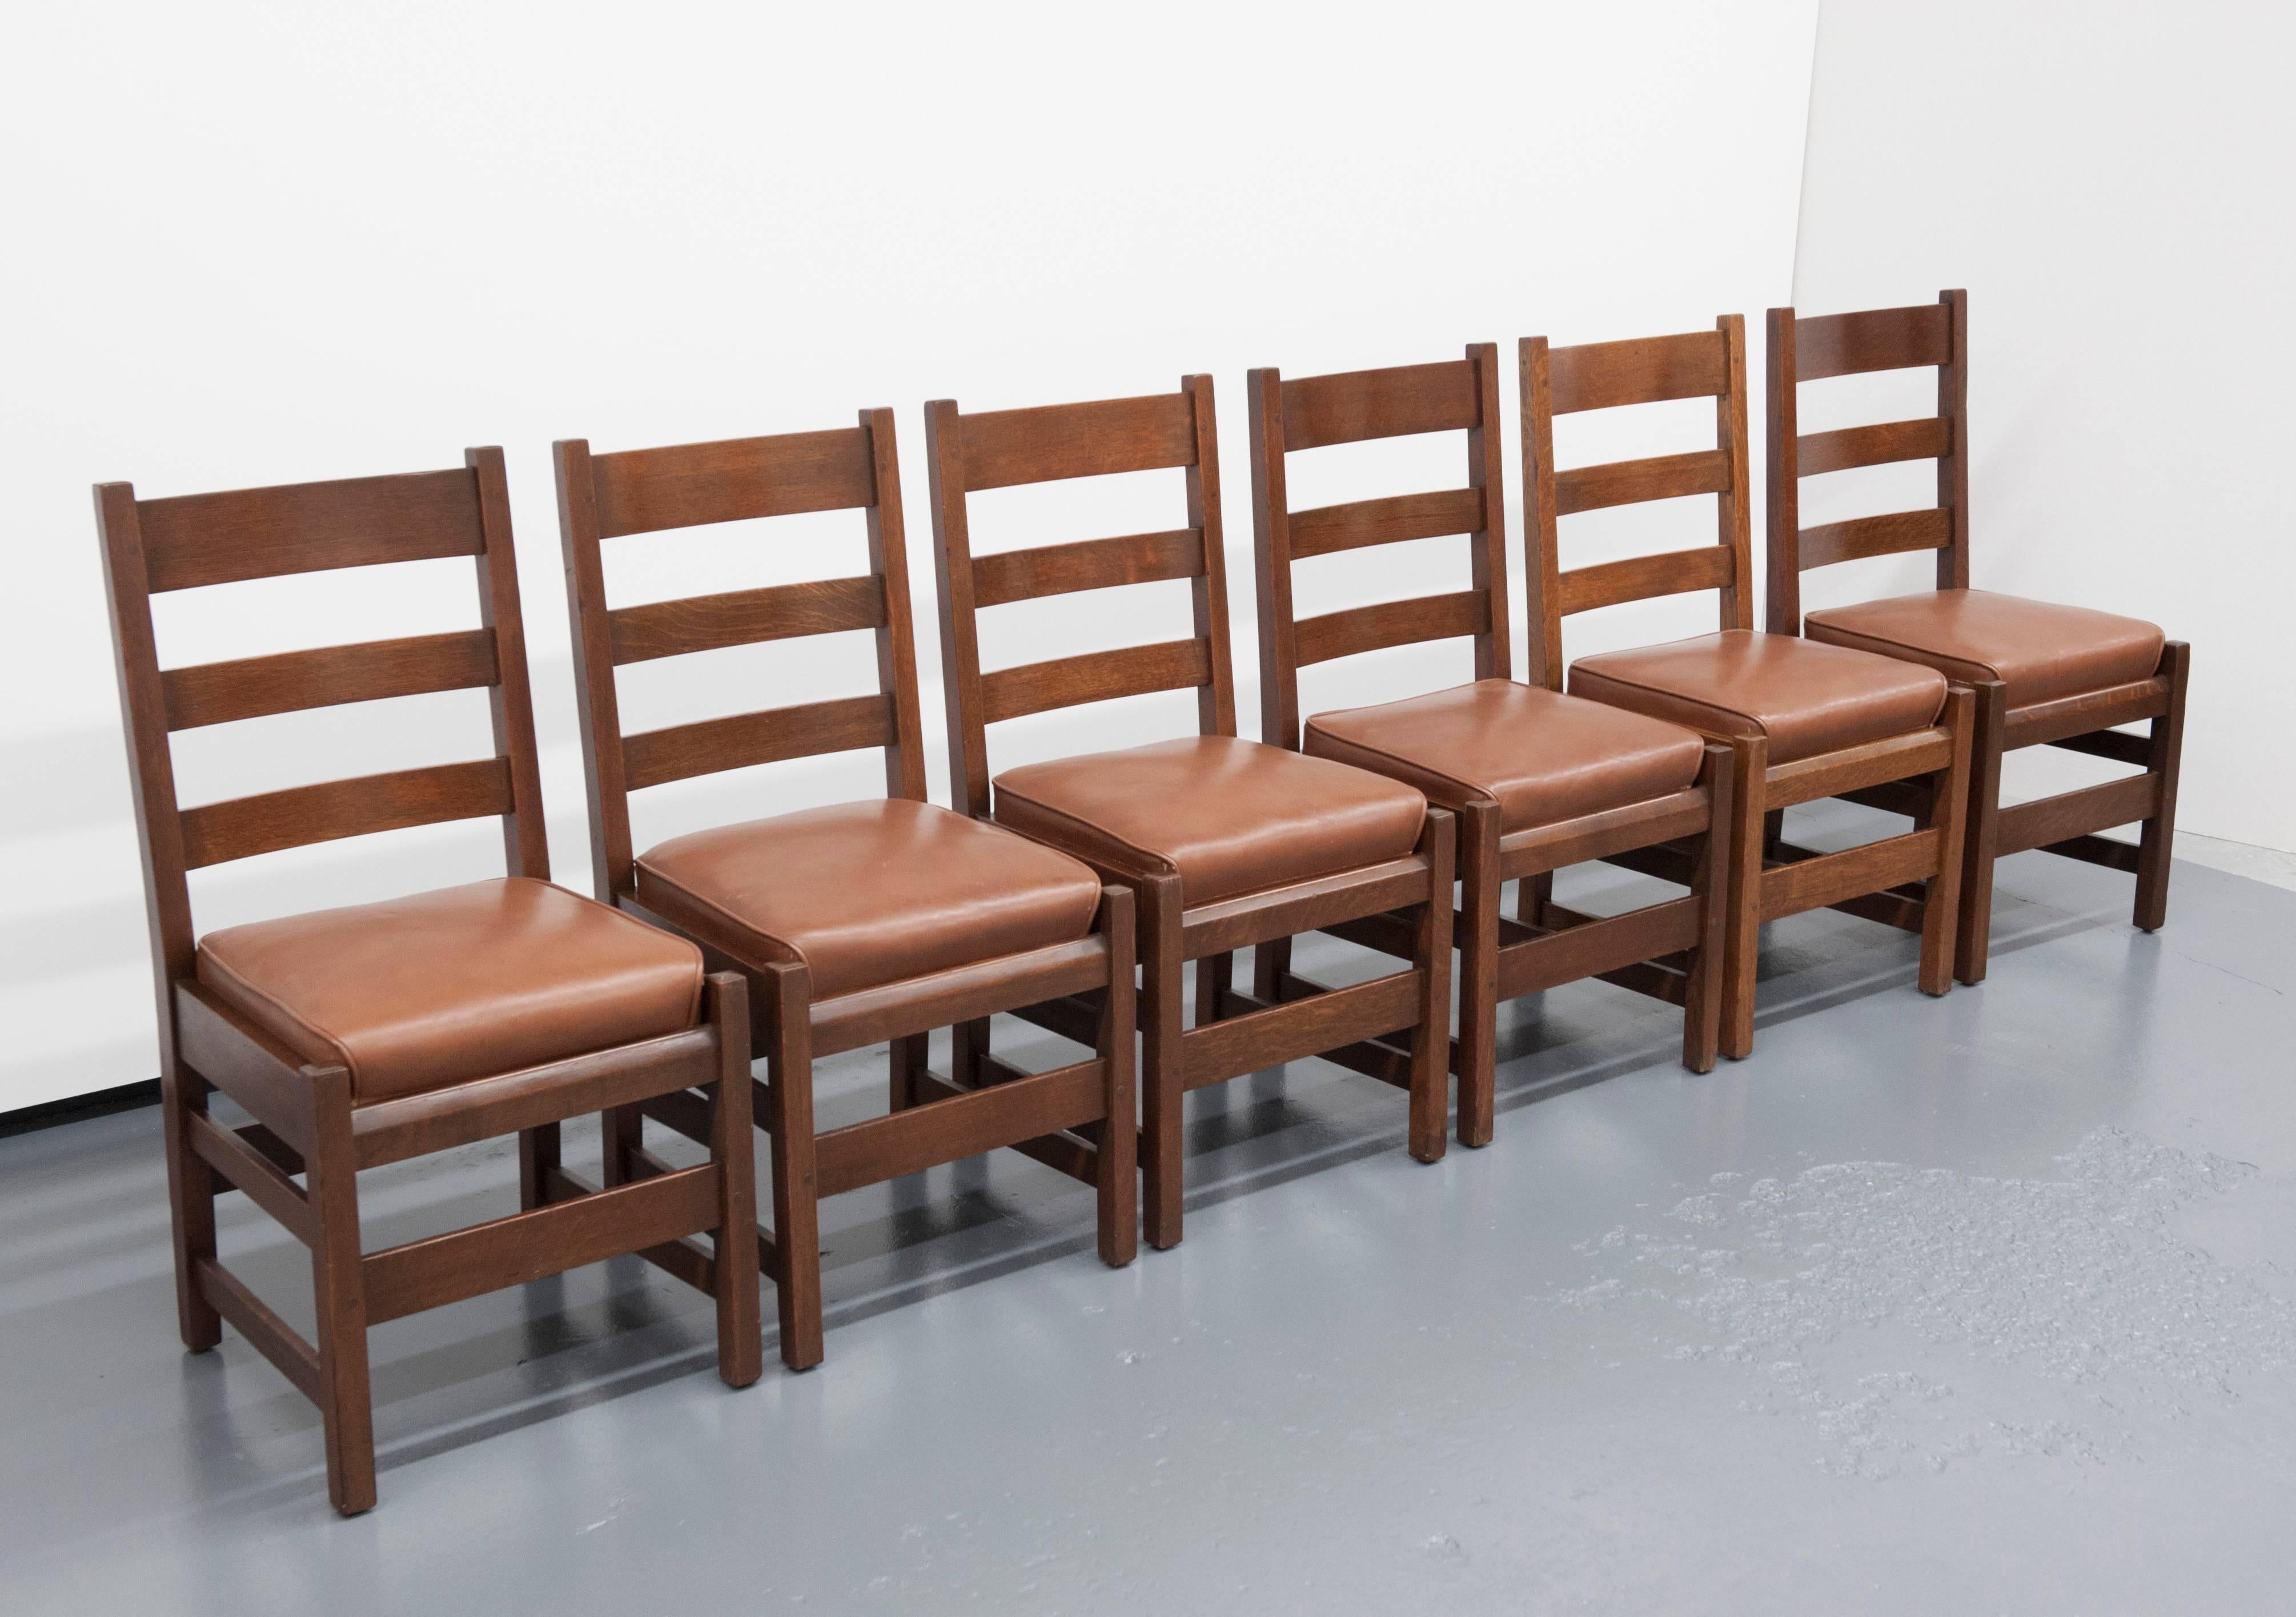 1905 Gustav Stickley designed set of six side chairs. Exceptional quality with original inner sprung leather seats. Solid oak construction with only light signs of use. Label shows chairs were made between 1916-1919. Price is for set of six chairs.